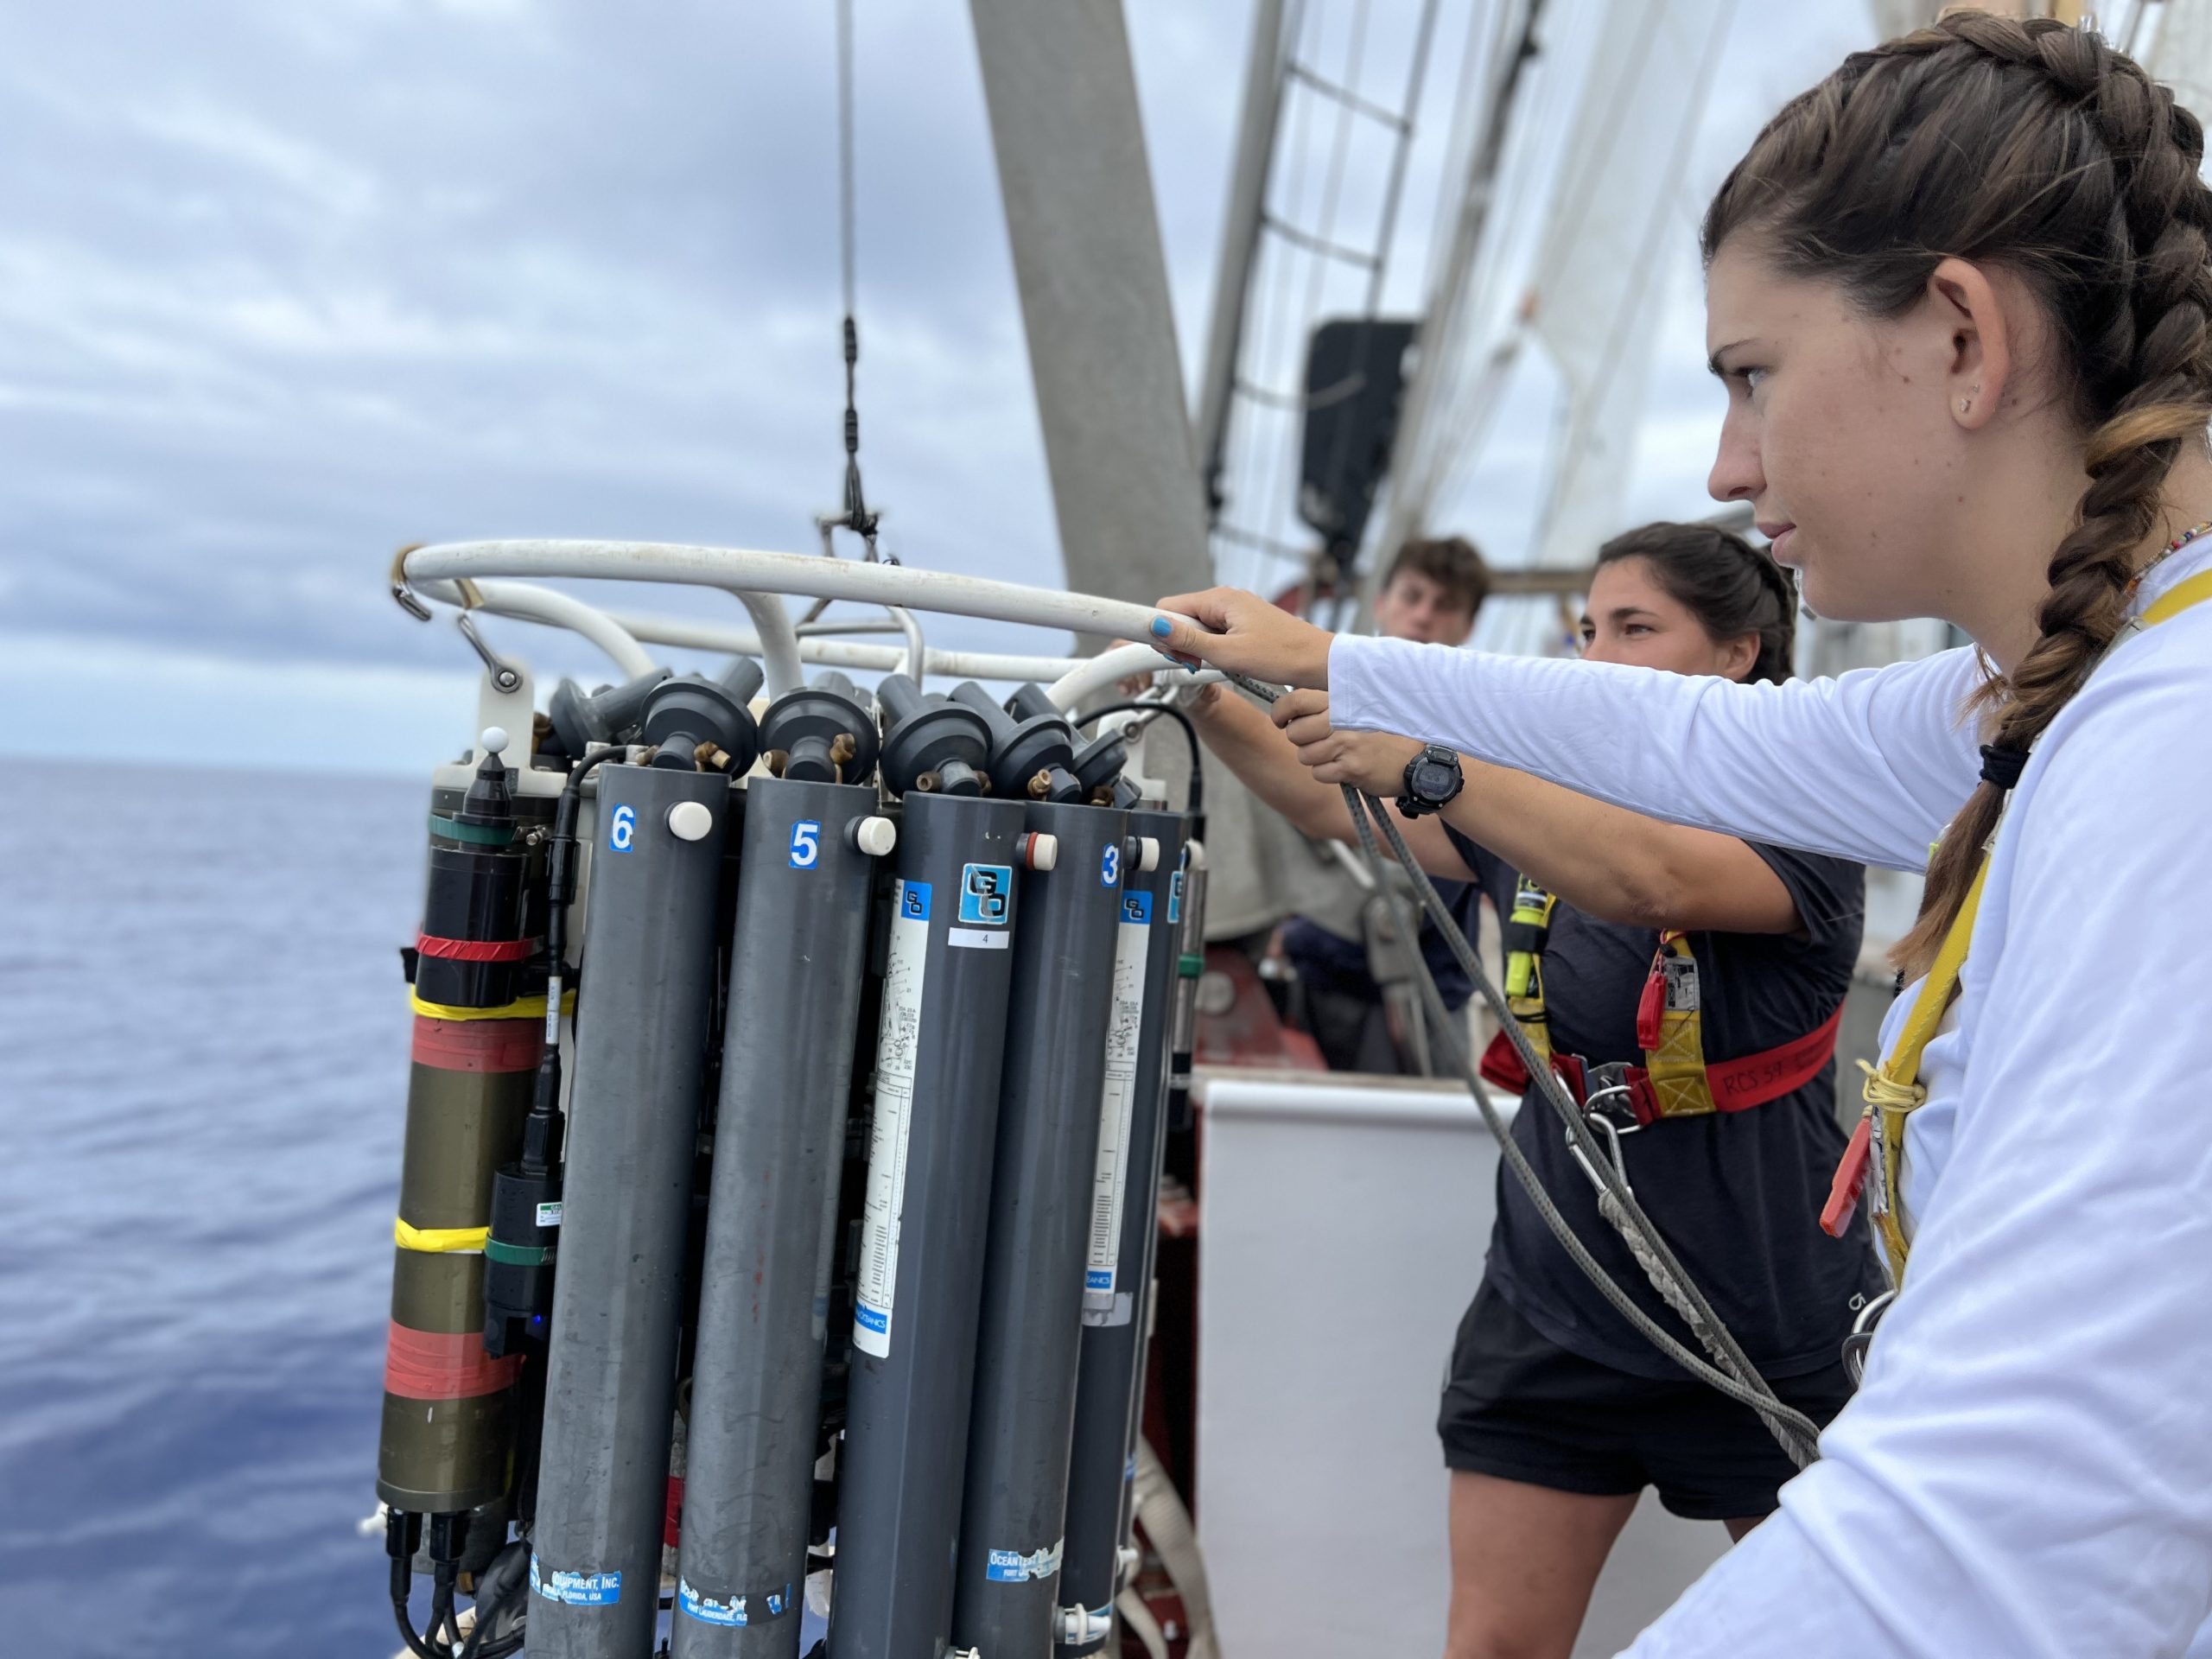 Brighton Hedger, Jordan Eckstein, and Diego Fernandez manage deploying the CTD for one of the first deployments of the voyage.